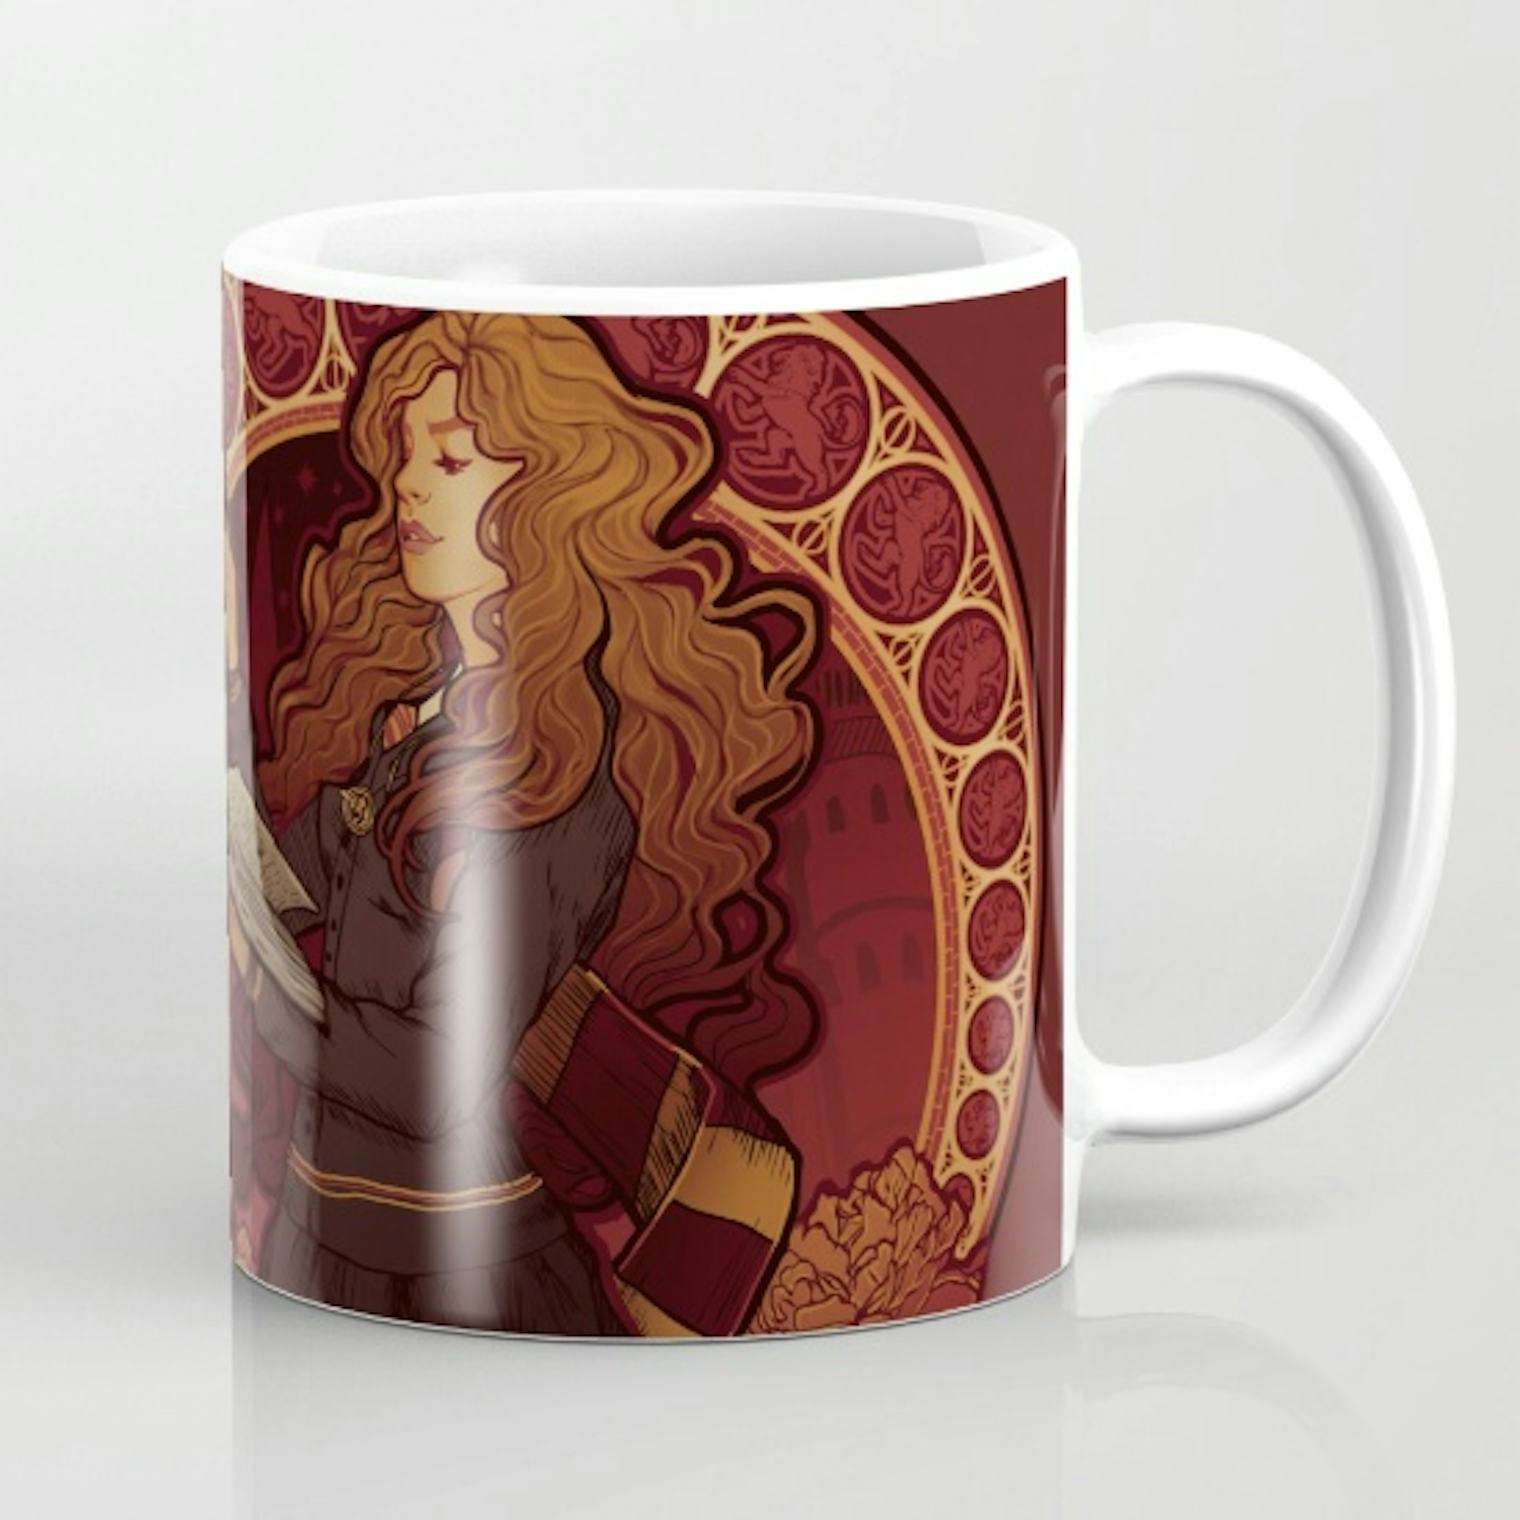 8 Hermione Granger Mugs Worthy Of The Brightest Witch Of Her Age